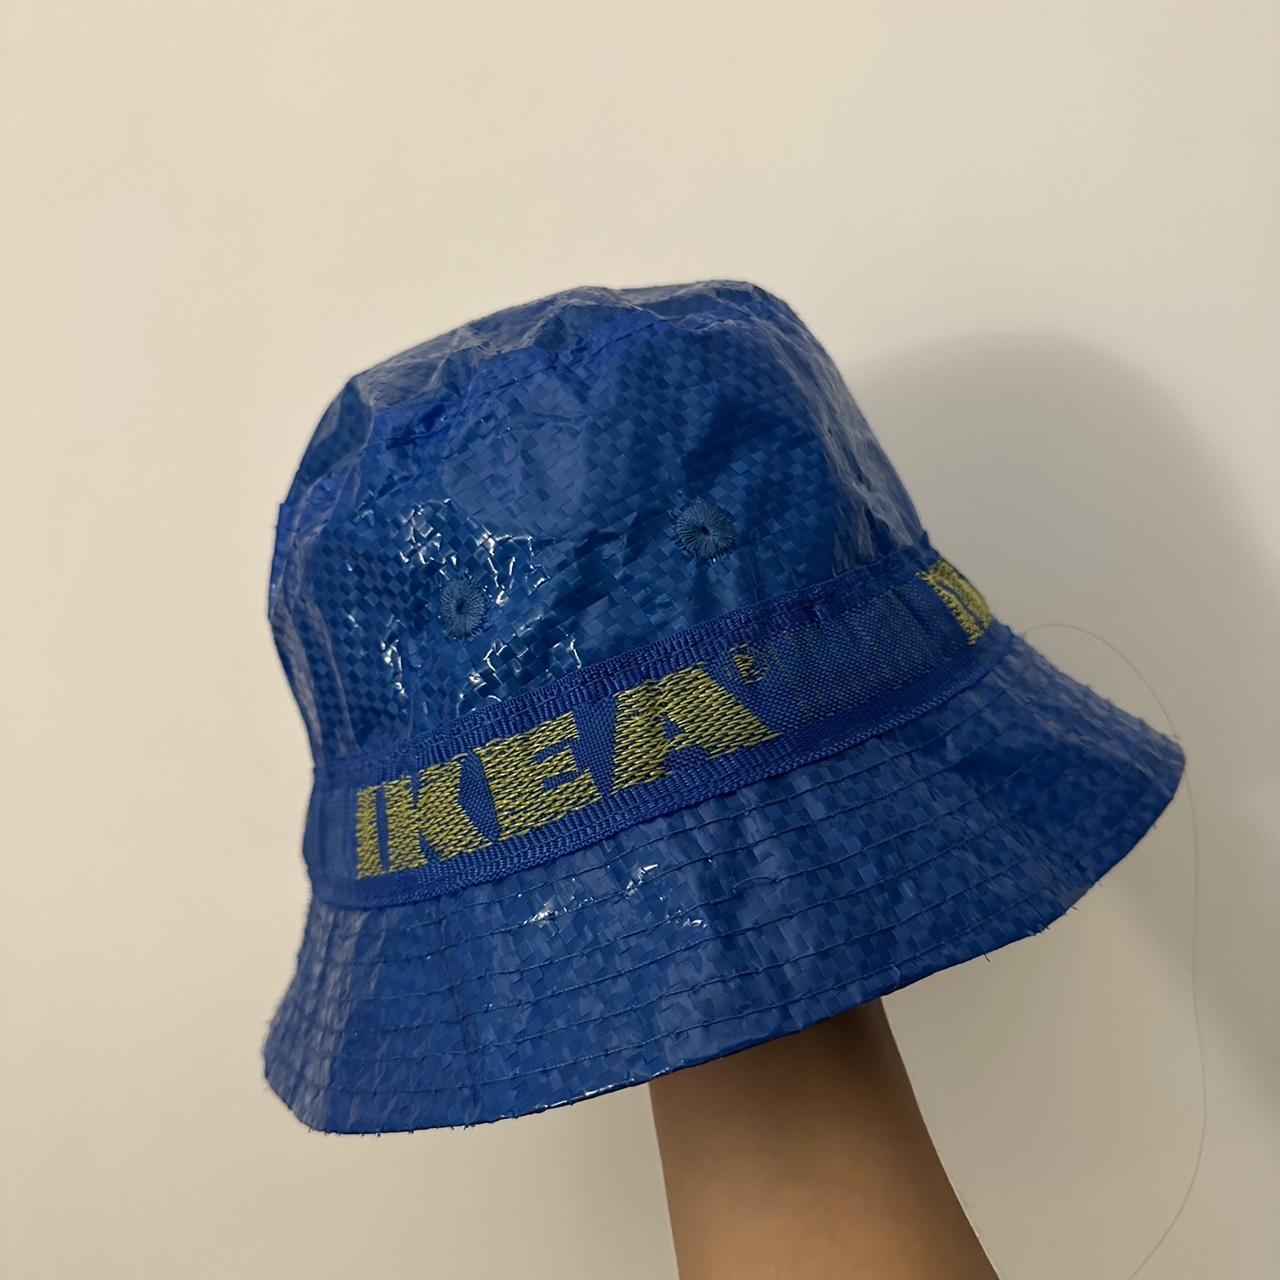 IKEA Women's Blue and Yellow Hat (2)